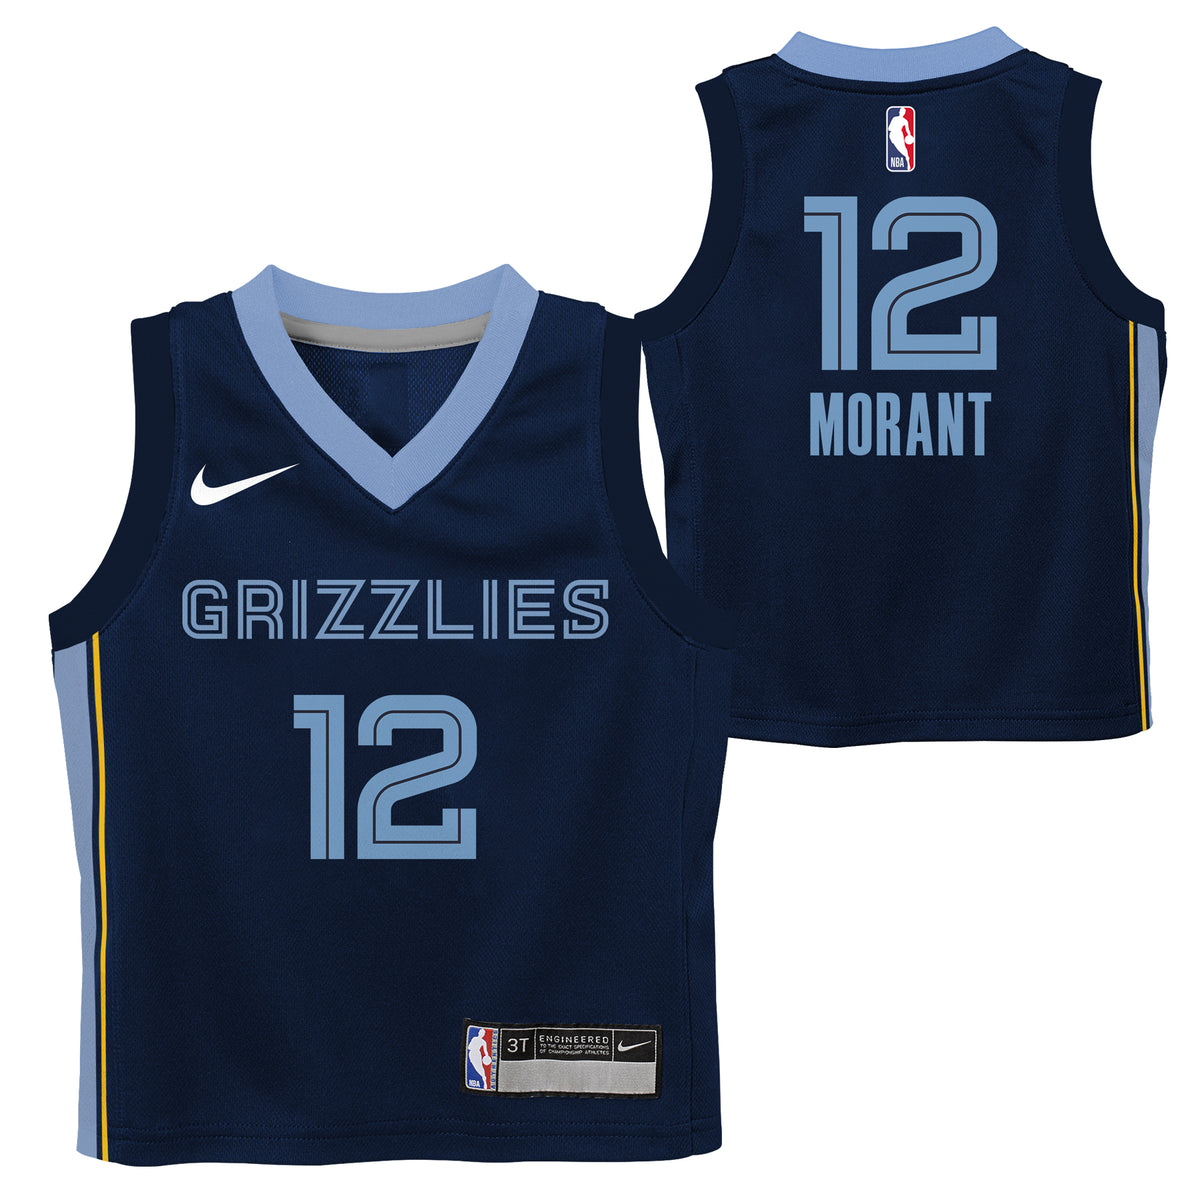 Amazing Ja Morant Vancouver Jersey in the world Don't miss out! en 2023